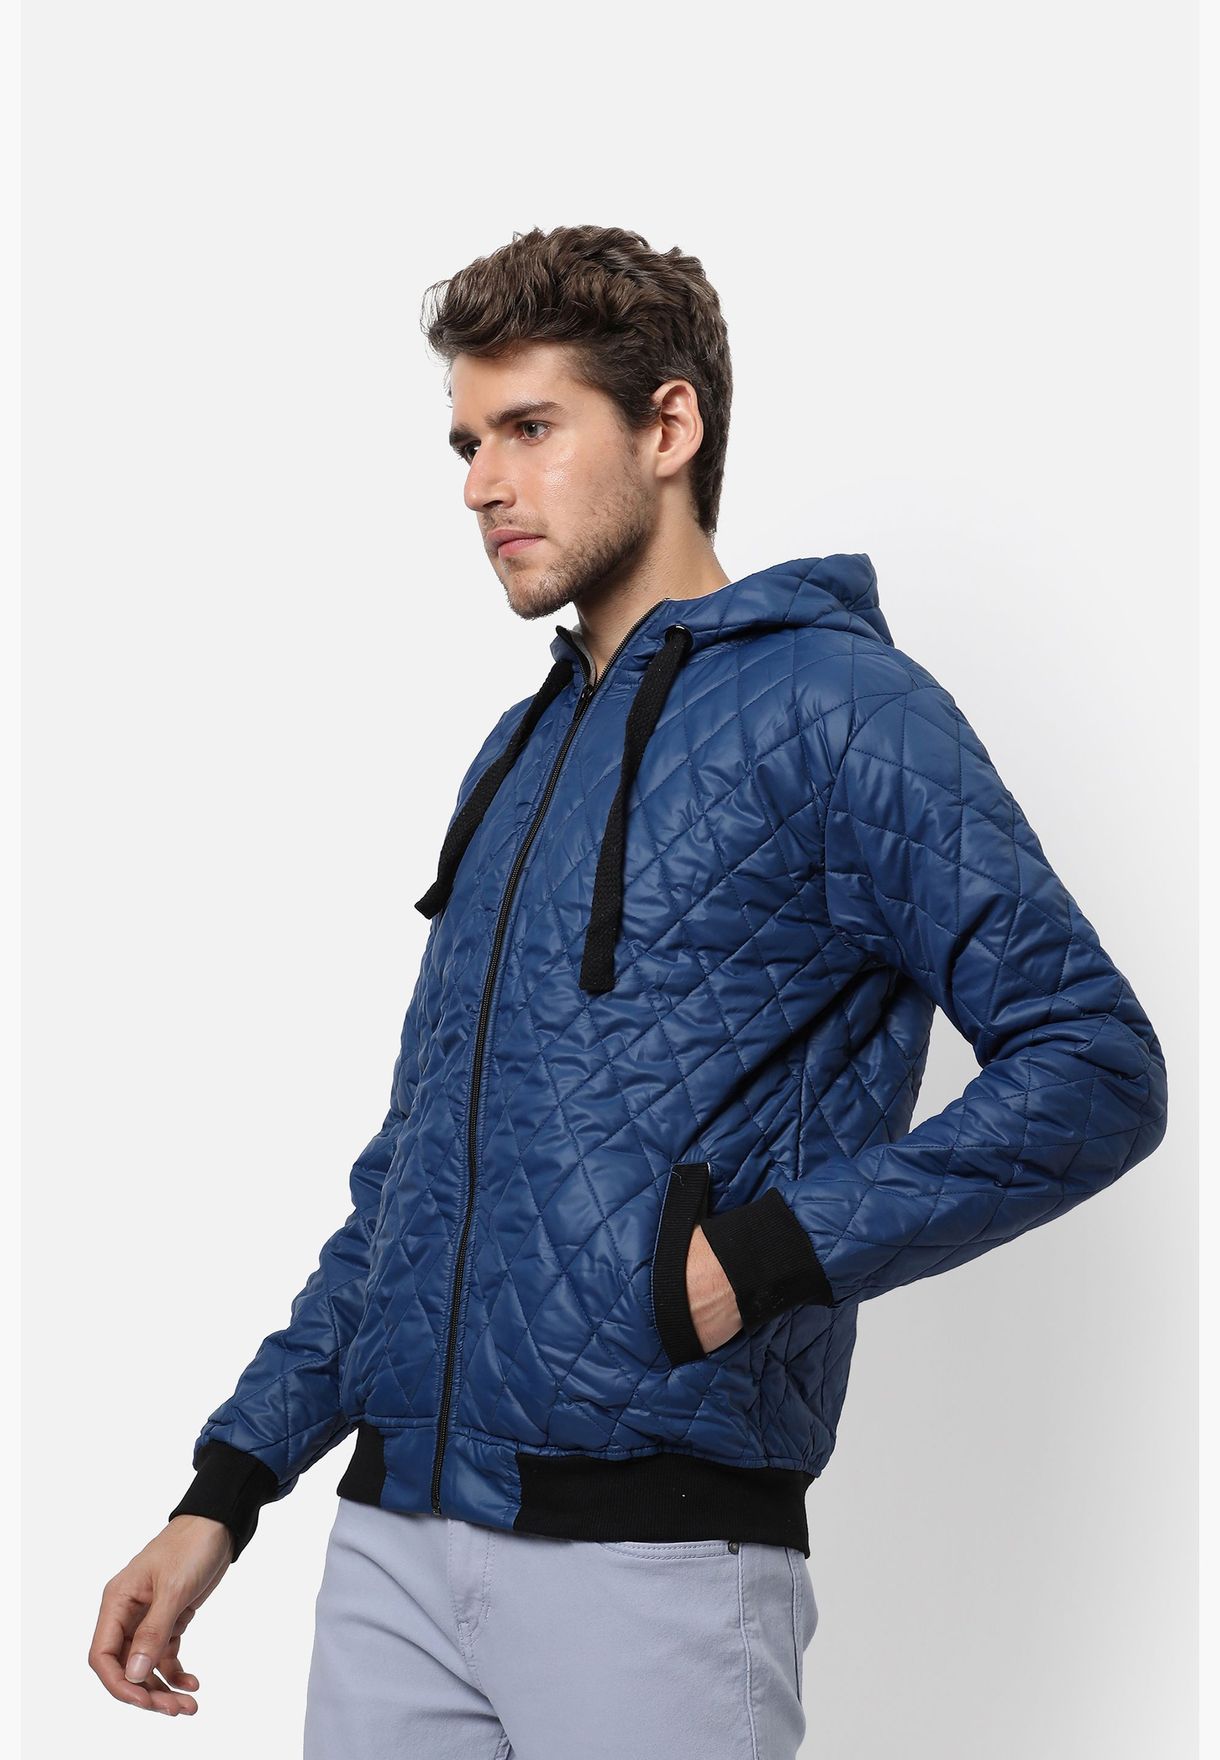 Men's Quilted Puffer Regular Fit Bomber Jacket For Winter Wear